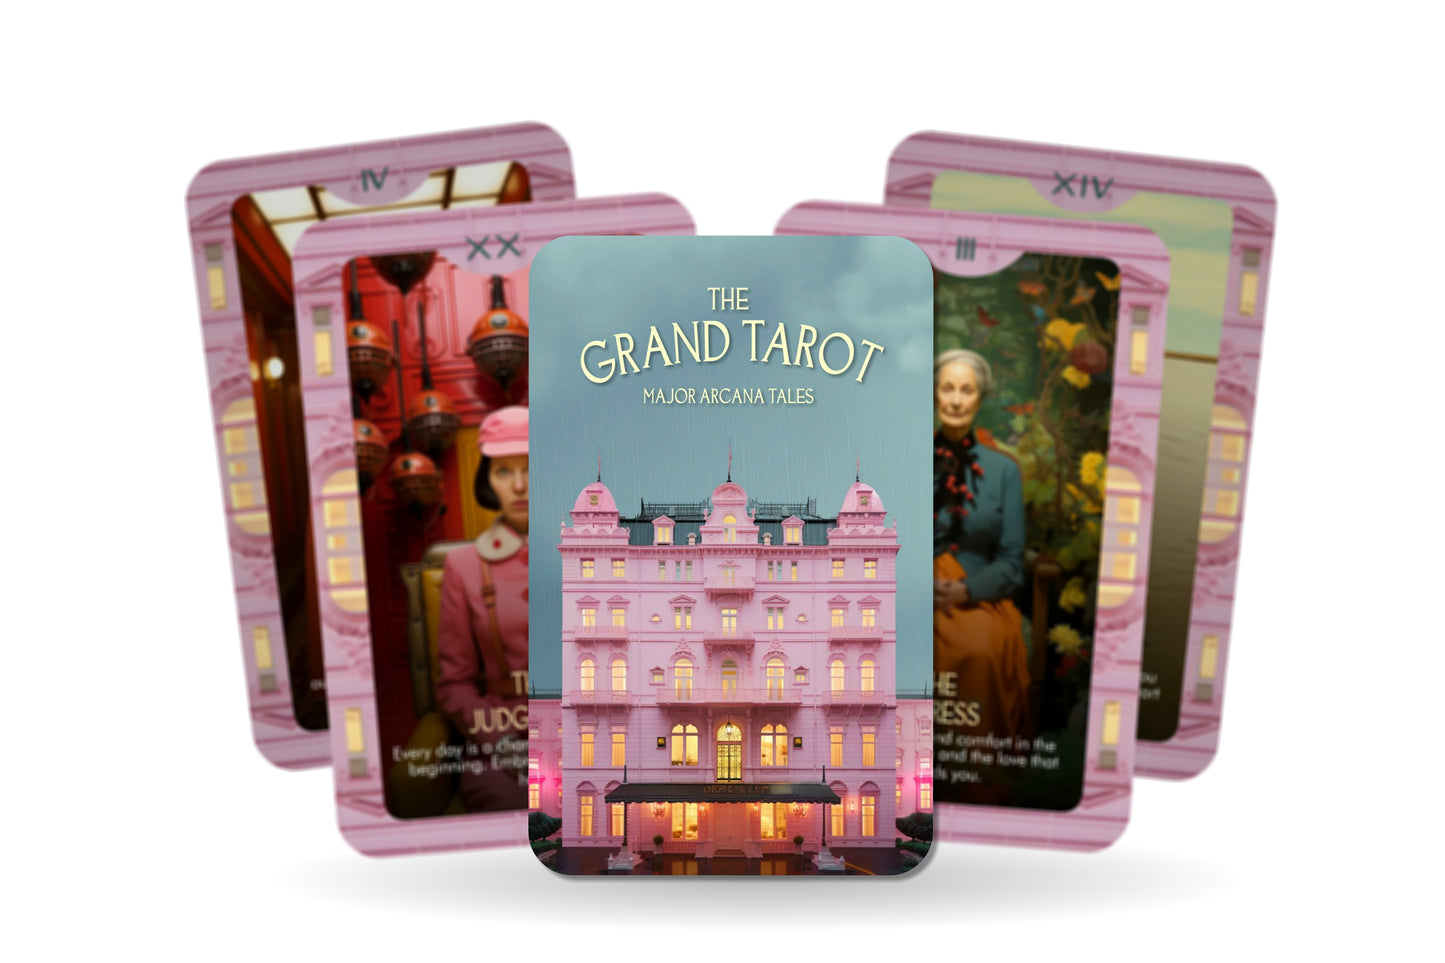 The Grand Tarot - Major Arcana Tales - Inspired by Wes Anderson